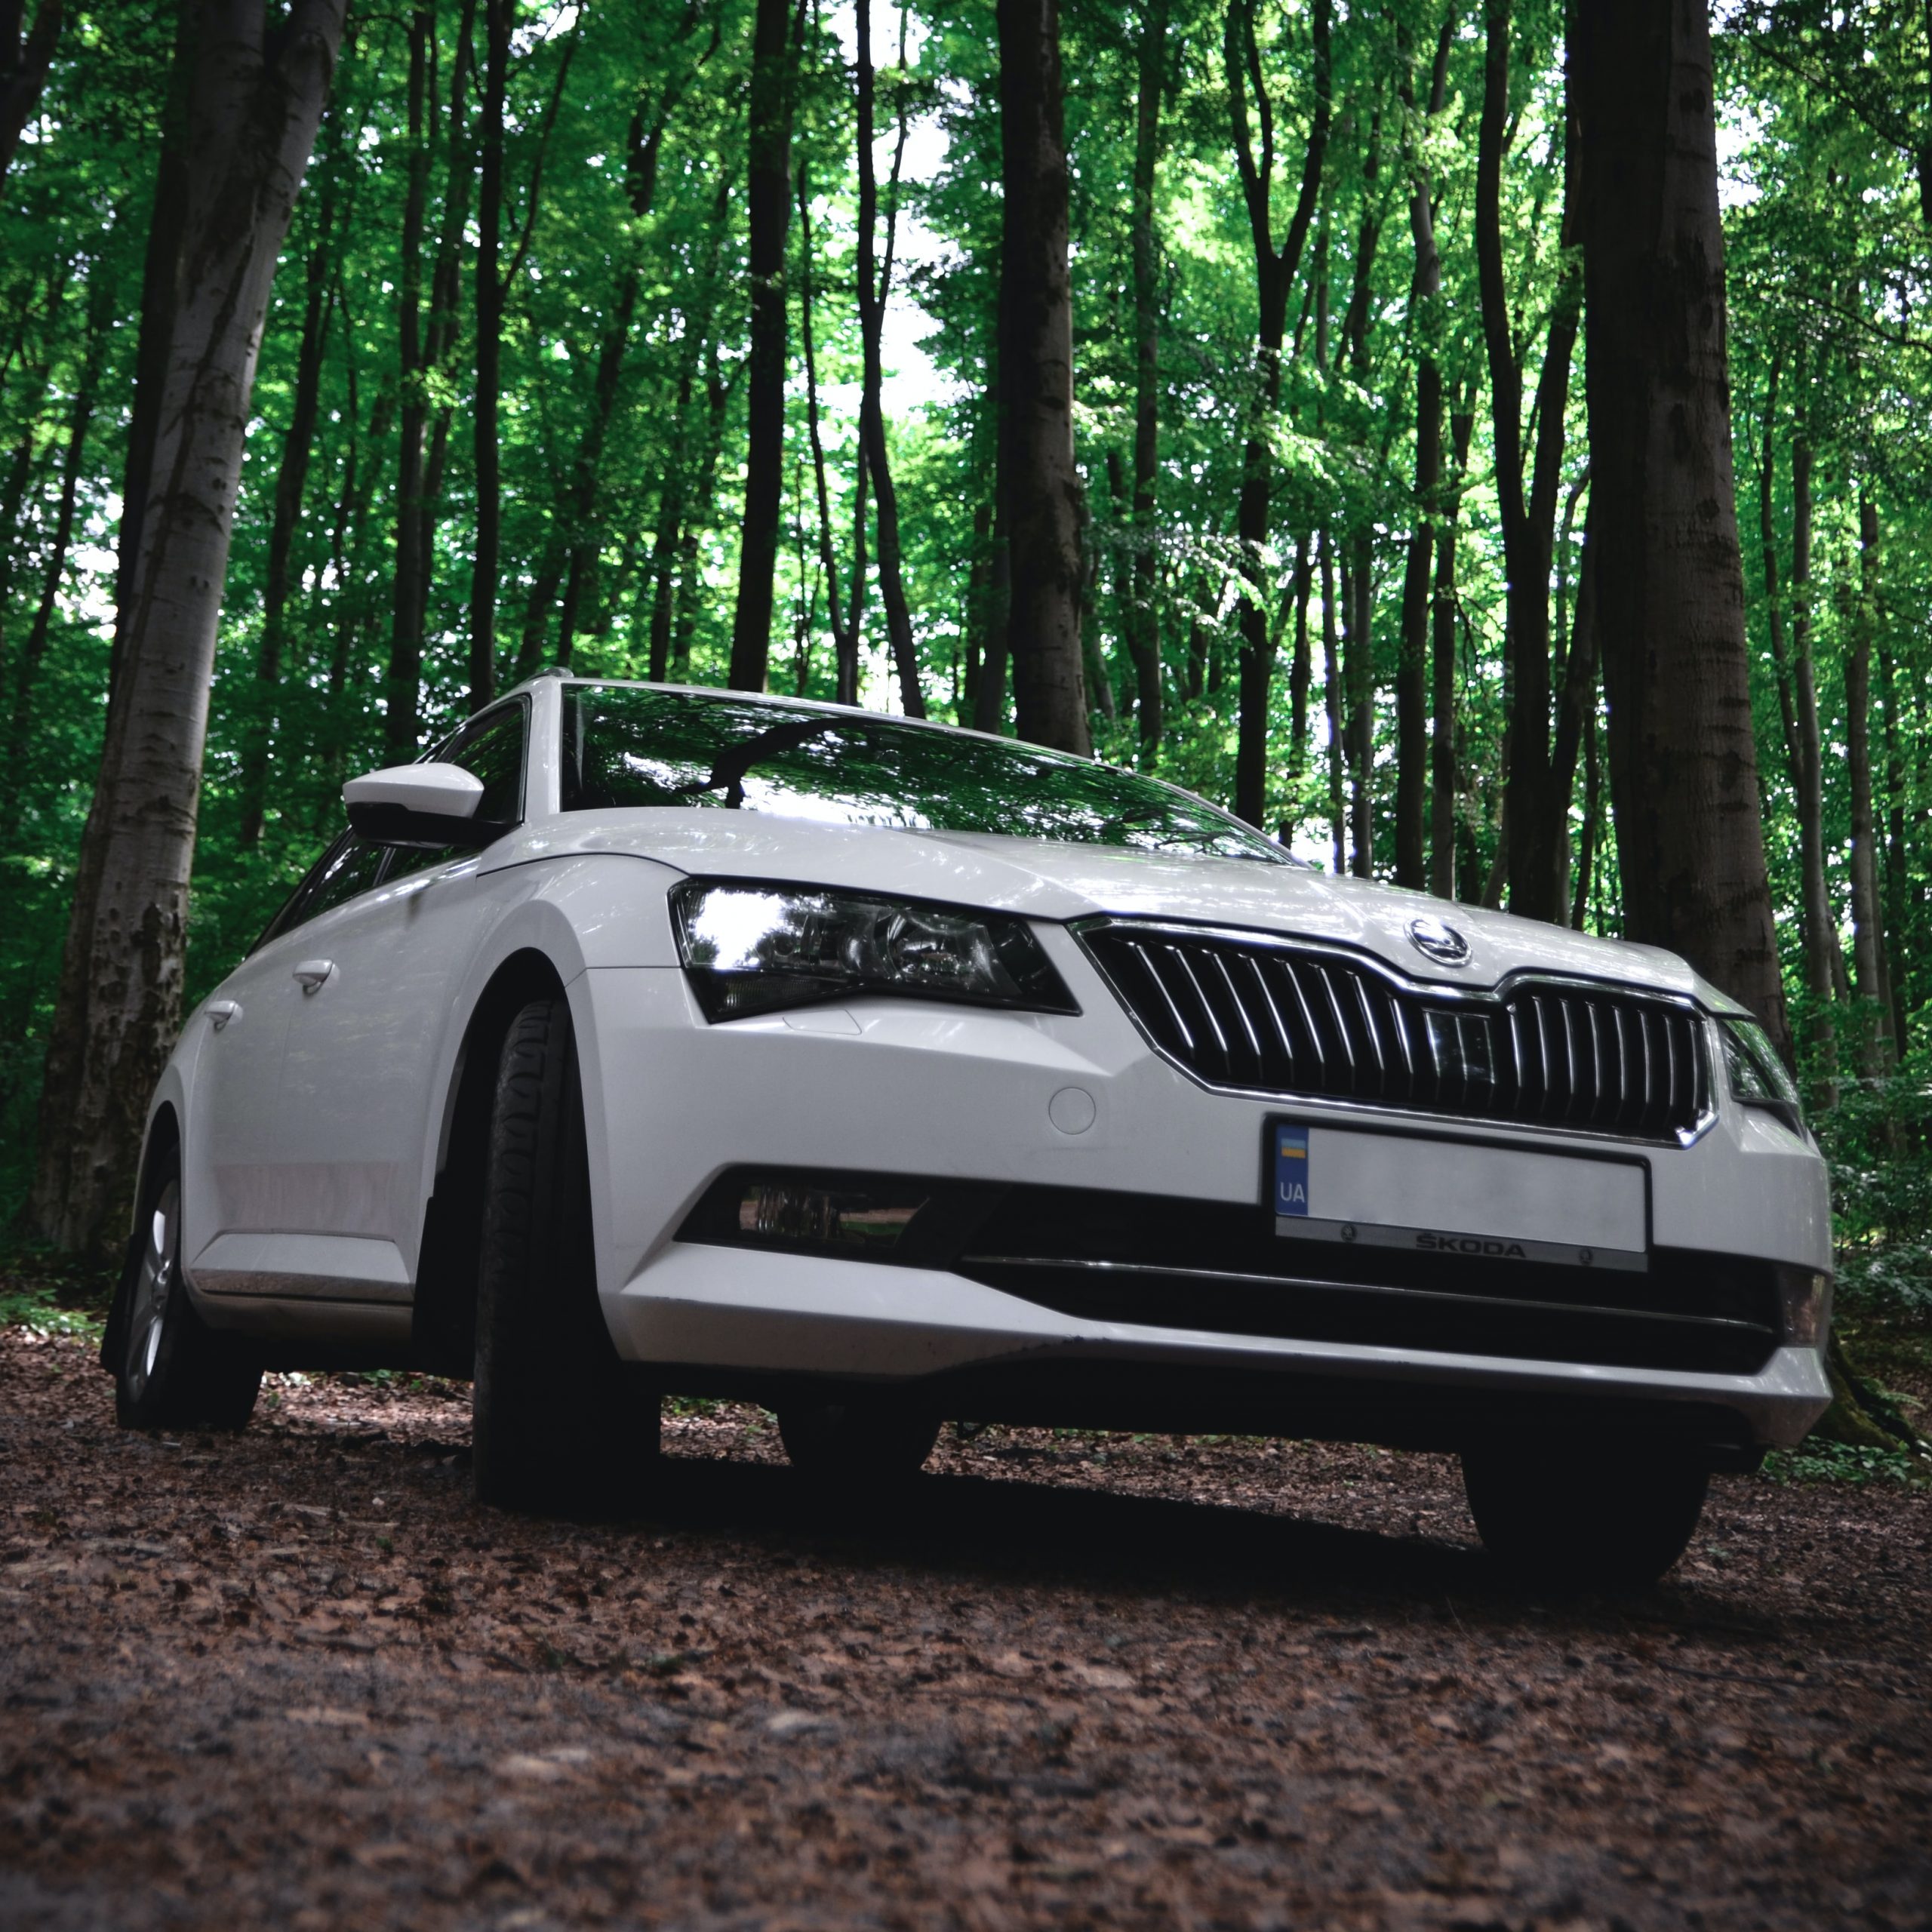 5 Reliable Cars to Consider for your Next Vehicle